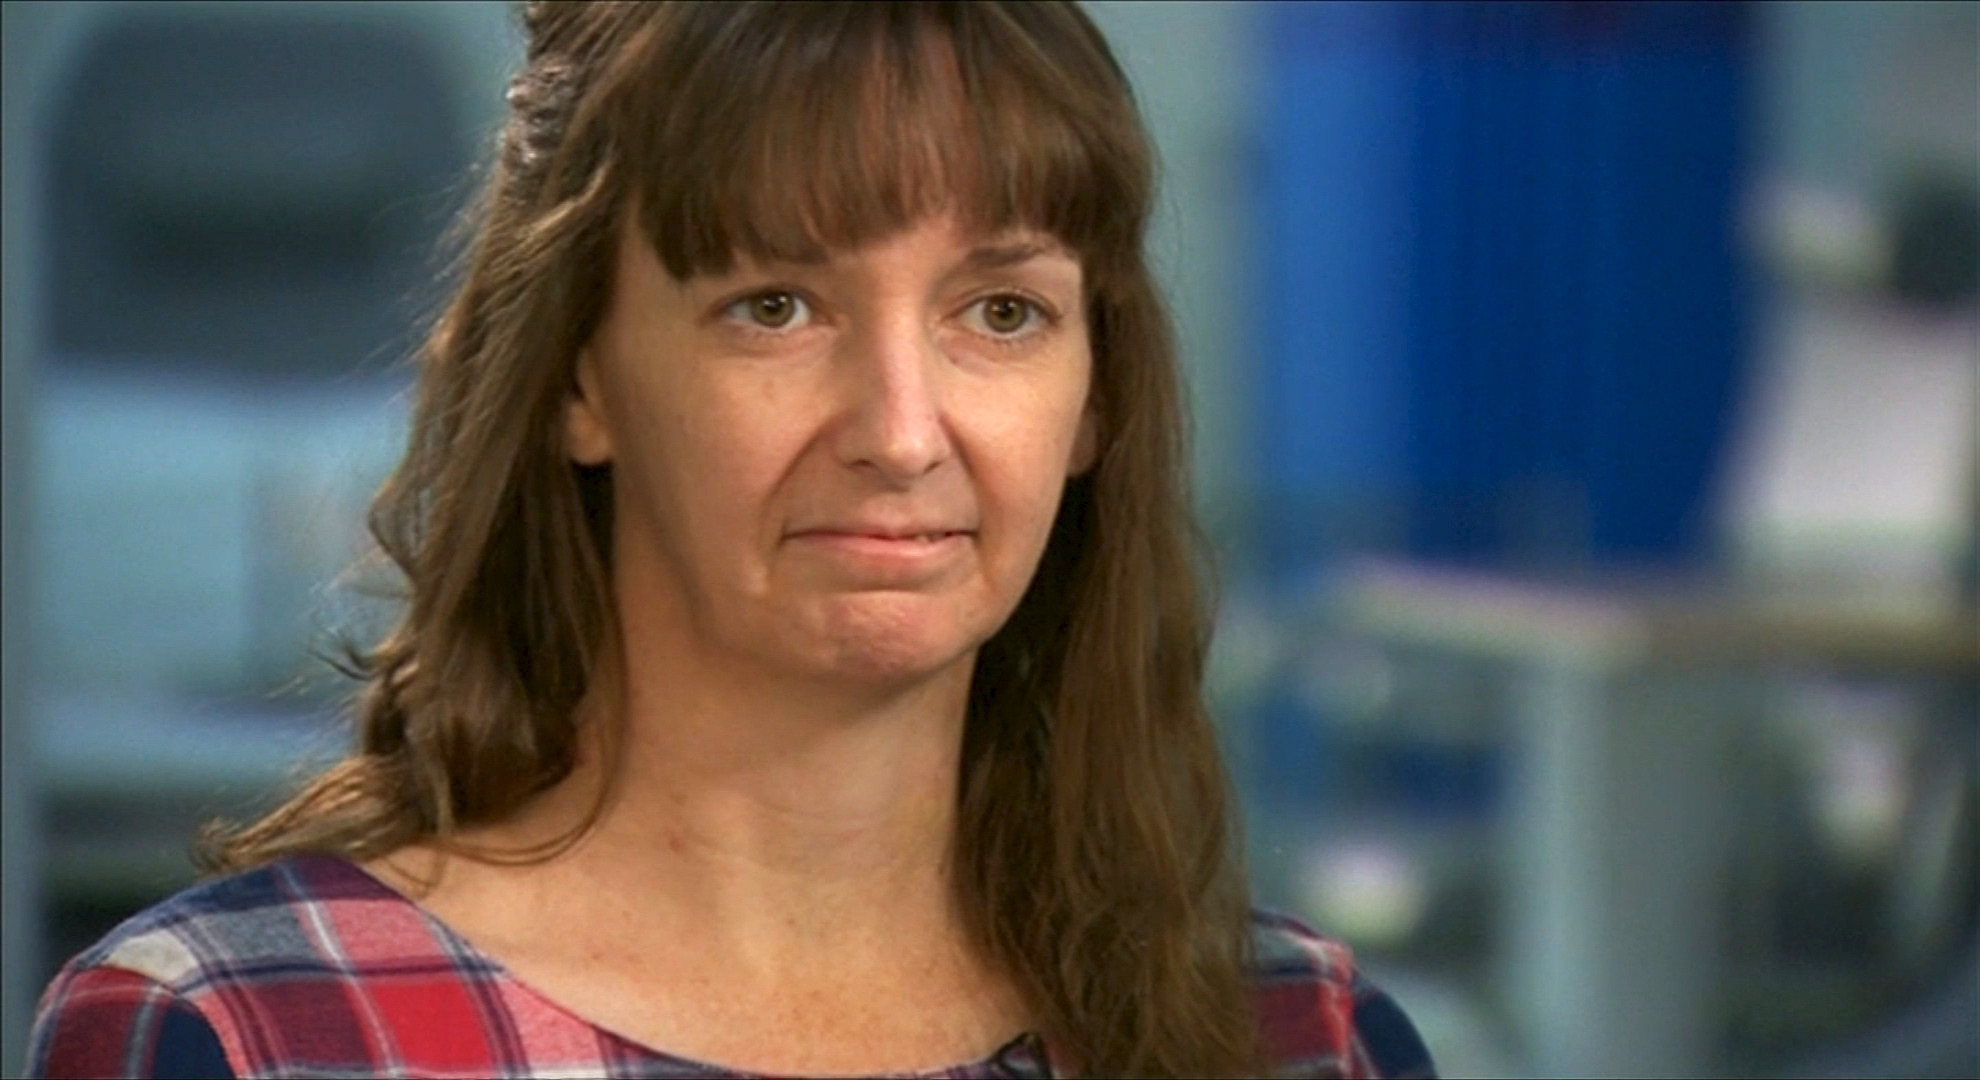 British nurse Pauline Cafferkey speaks during a January 2015 interview in London, in this still image taken from video footage